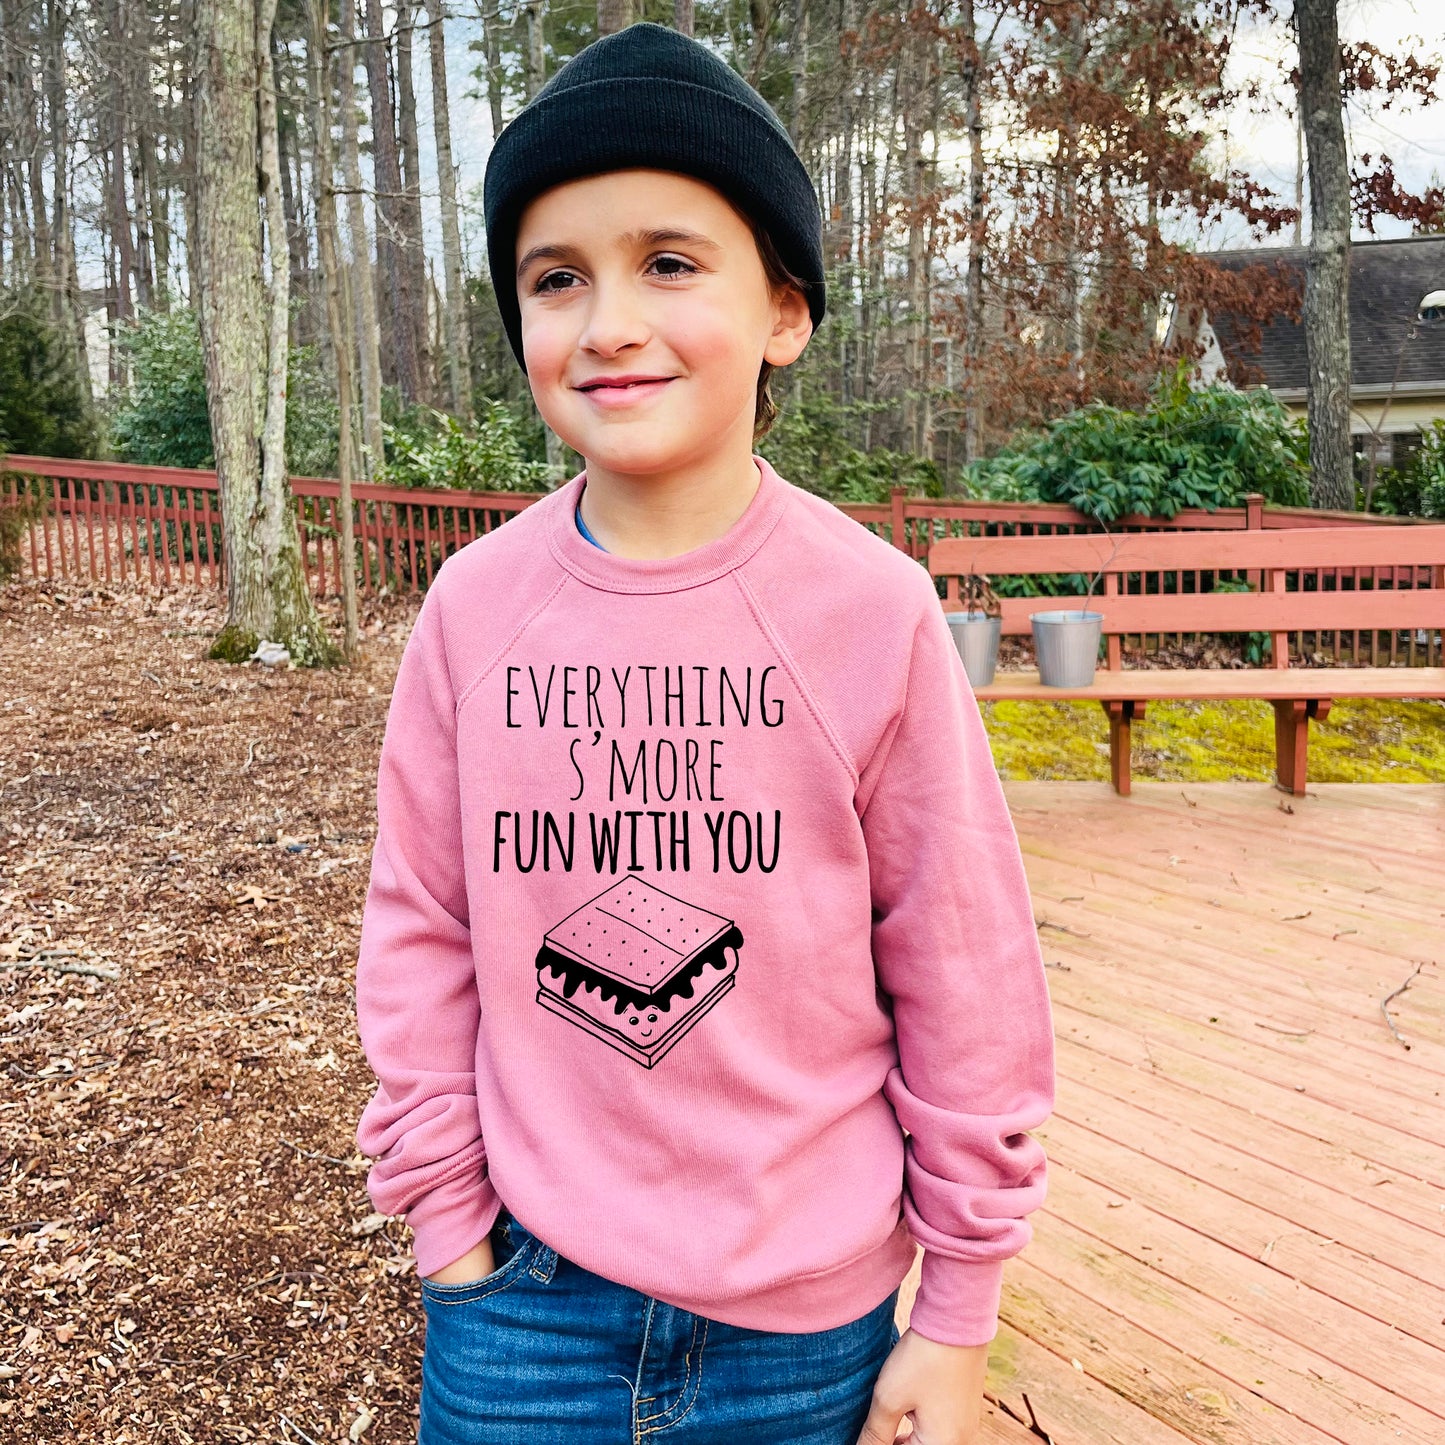 Everything S'more Fun With You - Kid's Sweatshirt - Heather Gray or Mauve